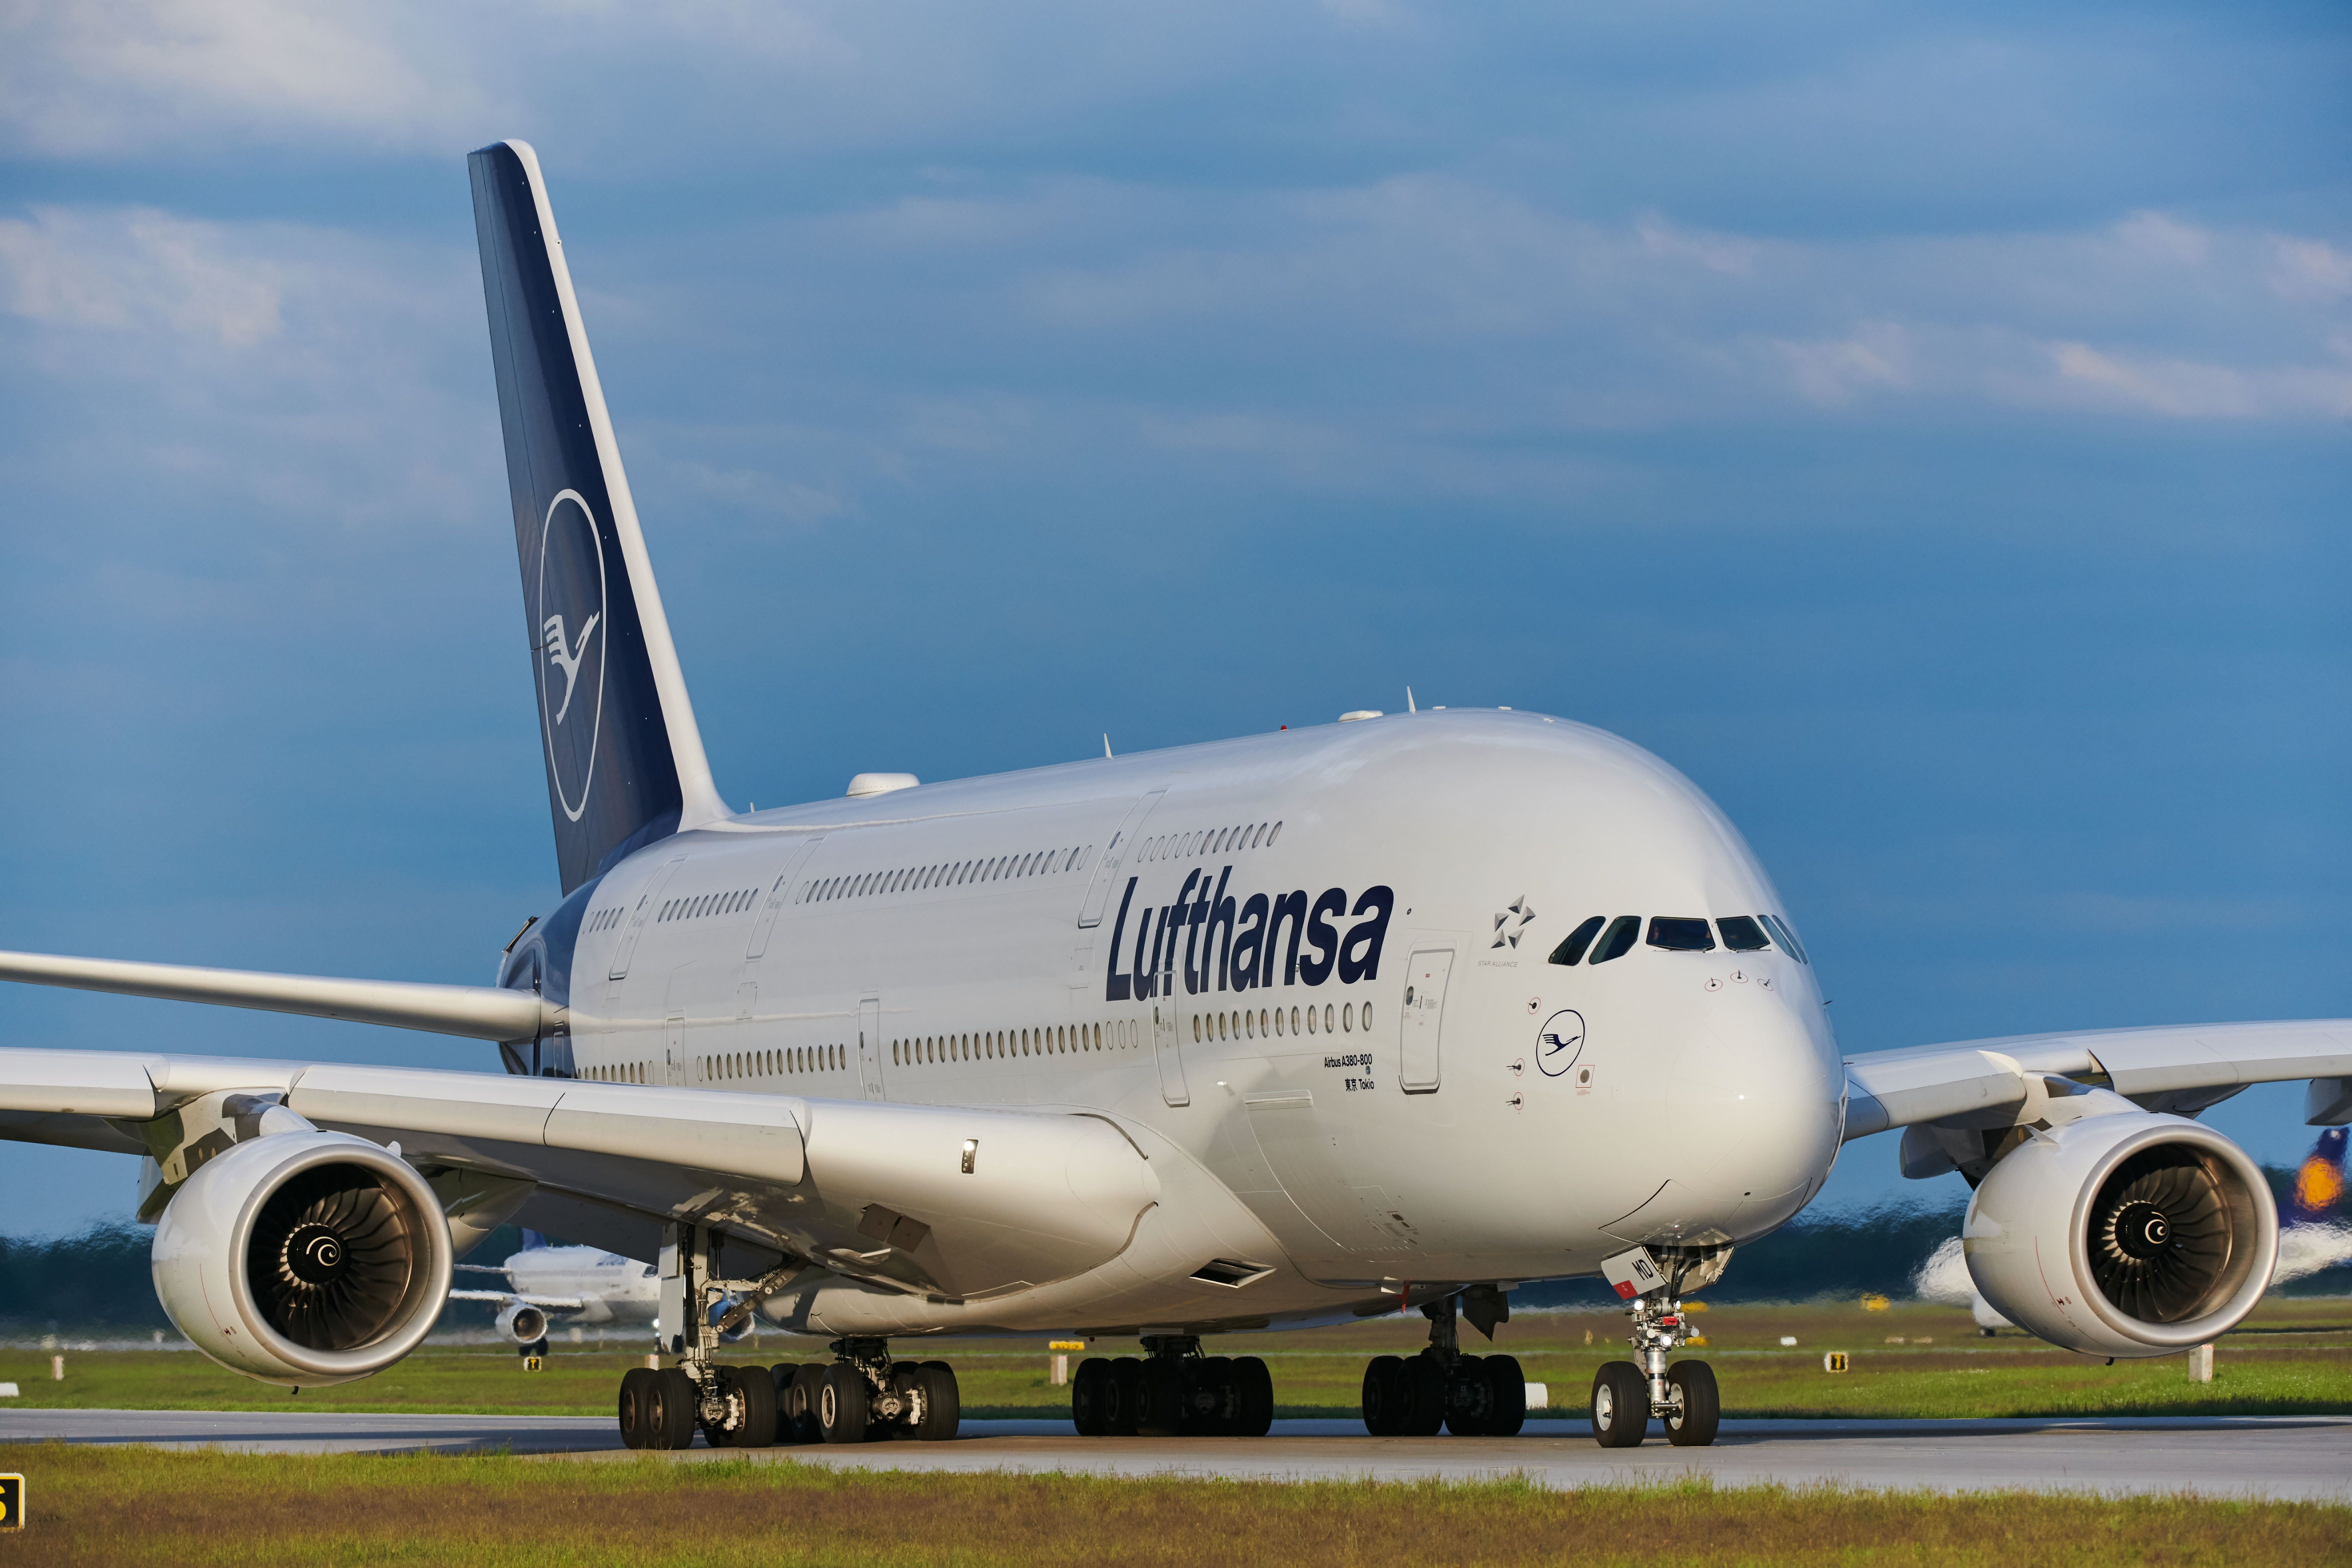 What is the biggest plane after A380?